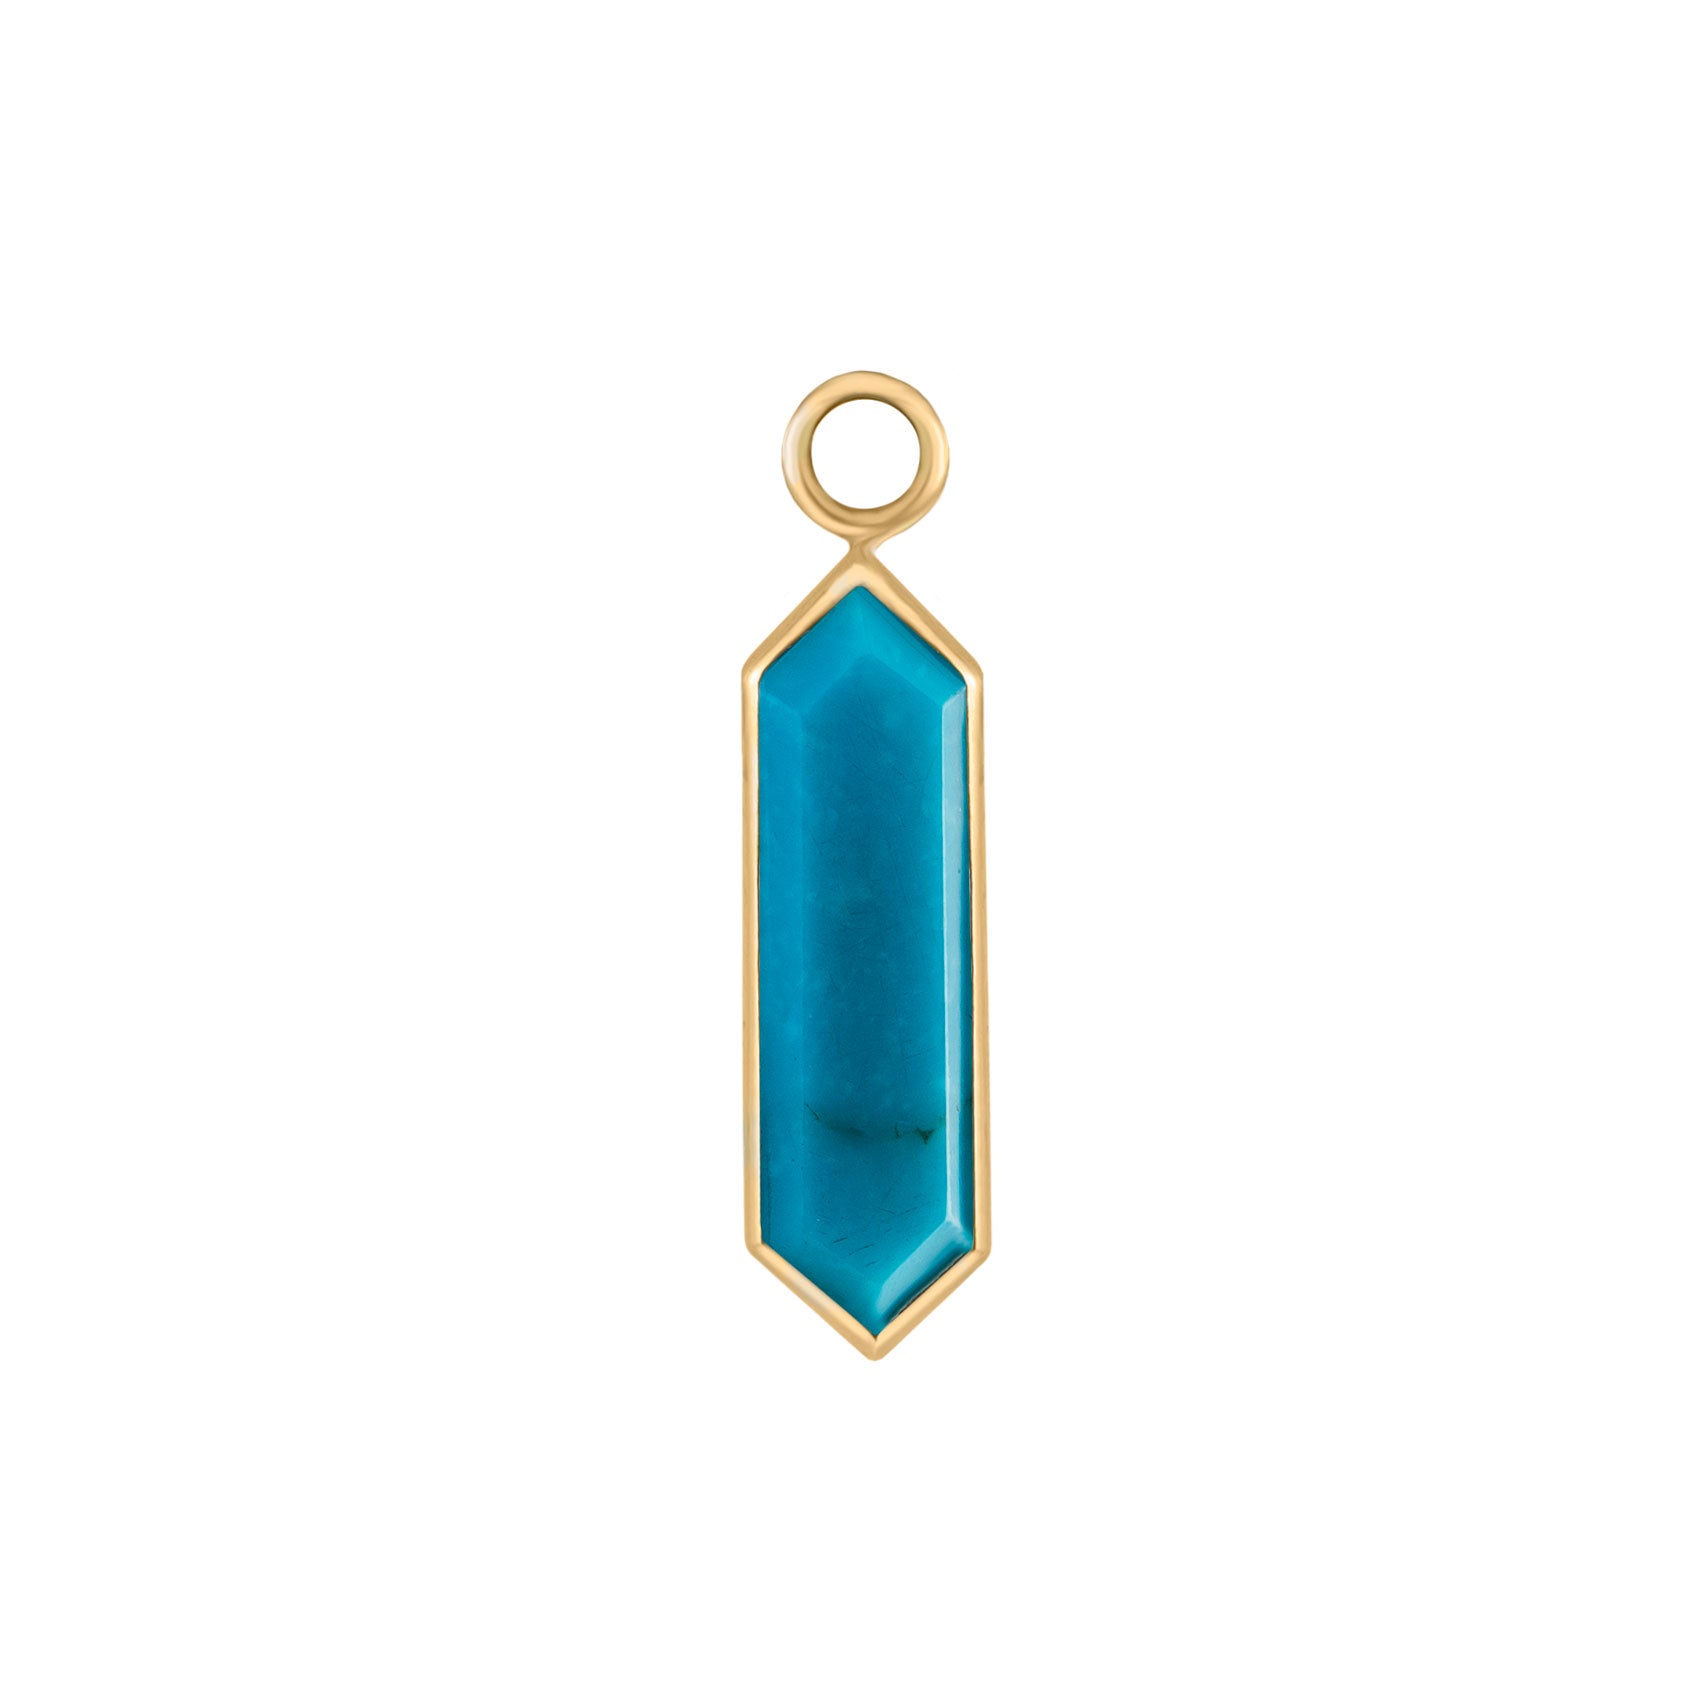 metier by tomfoolery 9ct yellow gold and turquoise hexa plaques.